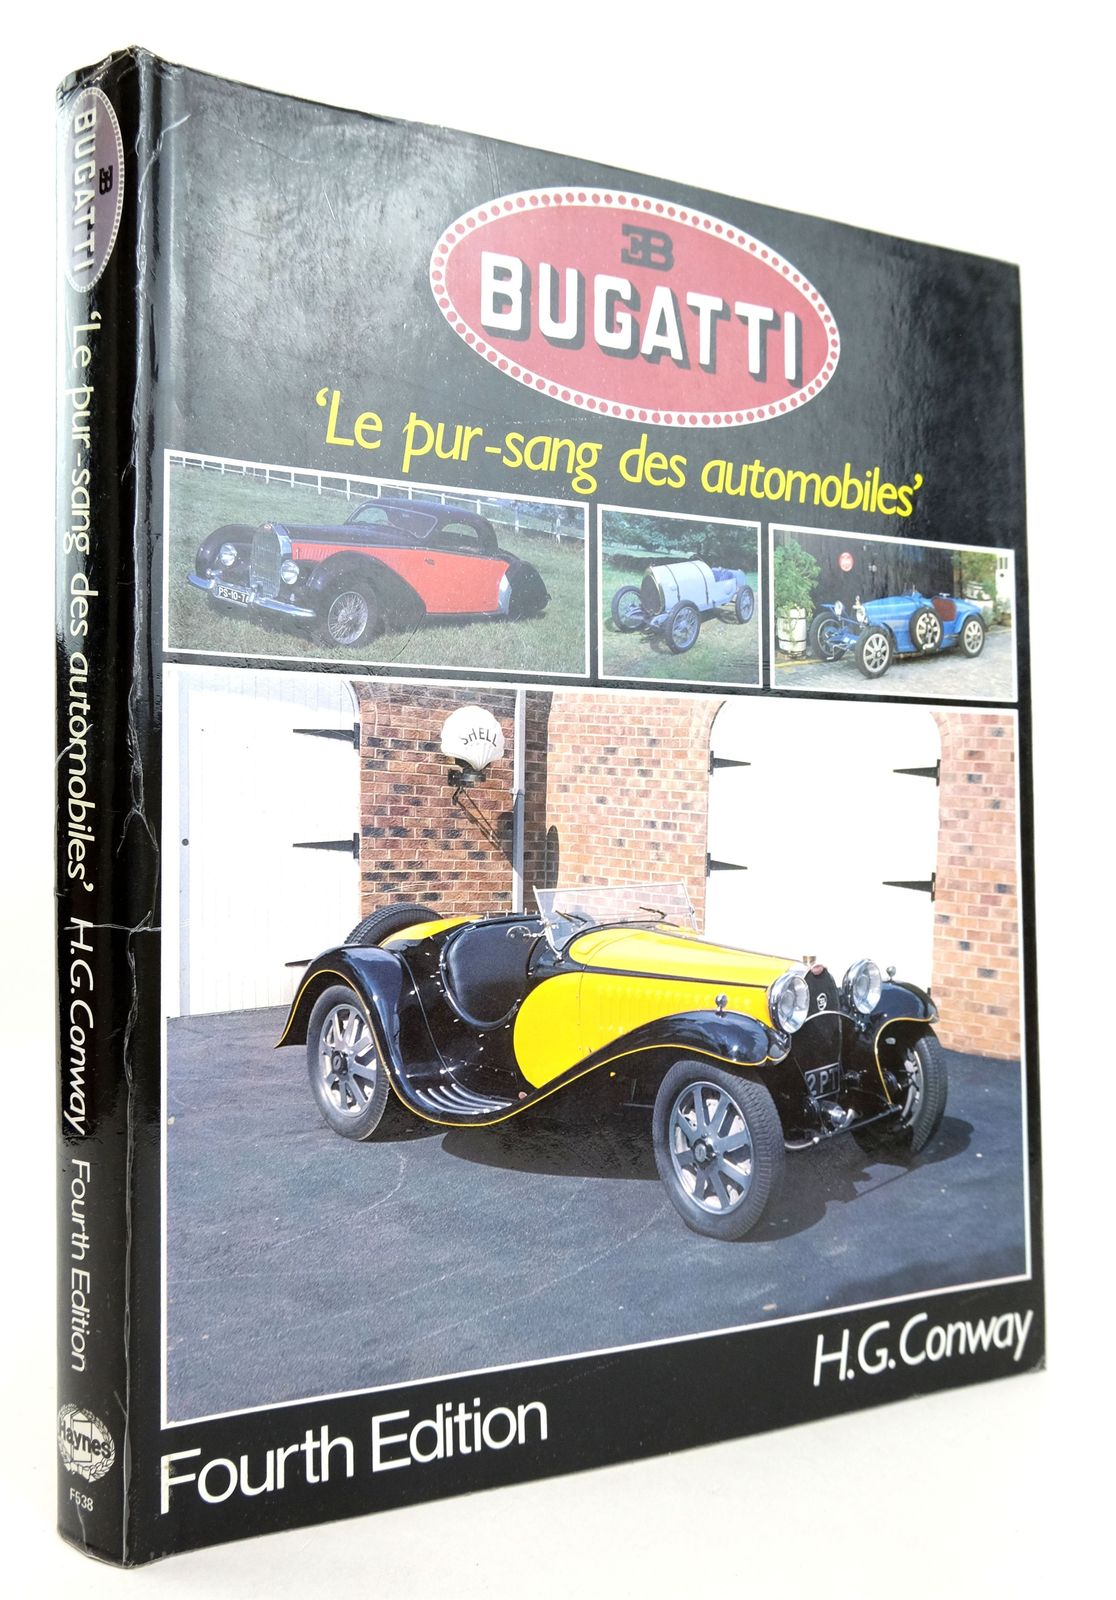 Photo of BUGATTI LE PUR-SANG DES AUTOMOBILES written by Conway, H.G. published by Haynes Publishing Group (STOCK CODE: 1819329)  for sale by Stella & Rose's Books